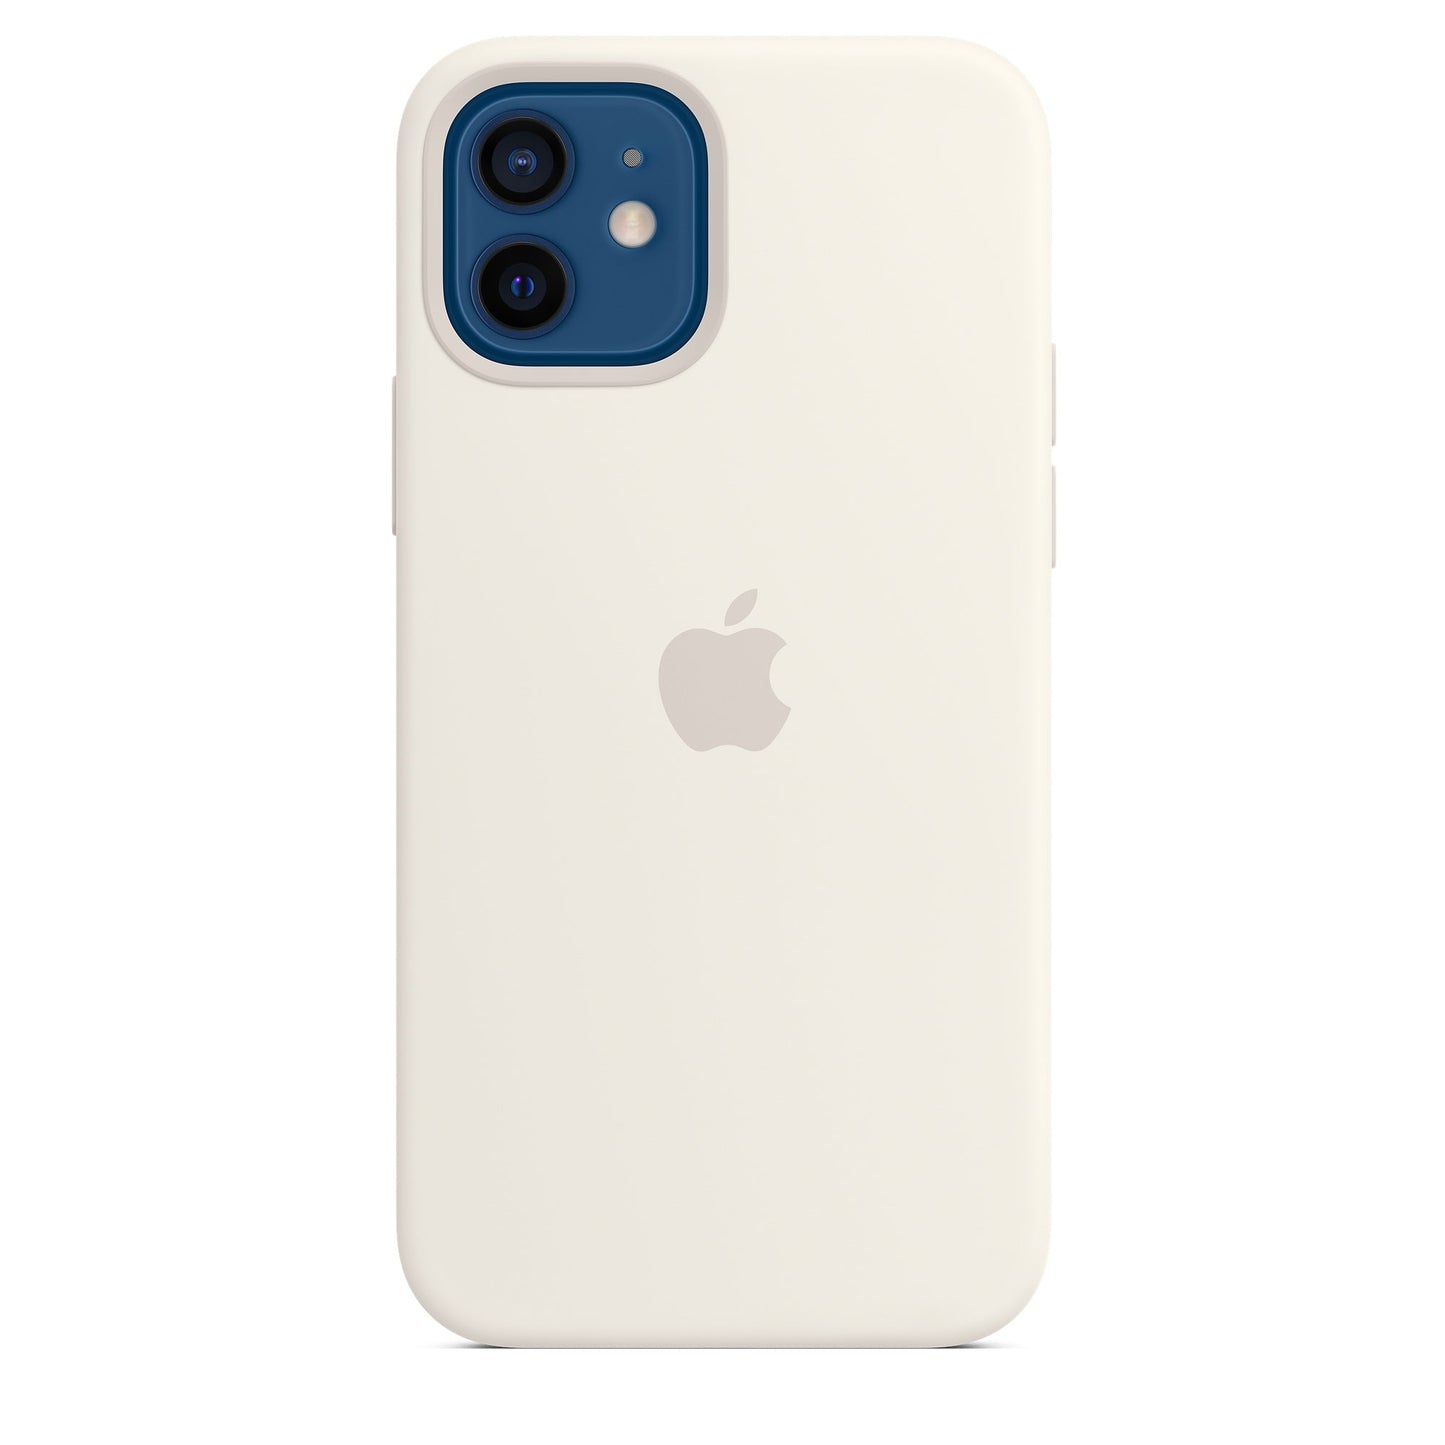 Iphone 12/12 Pro Covers